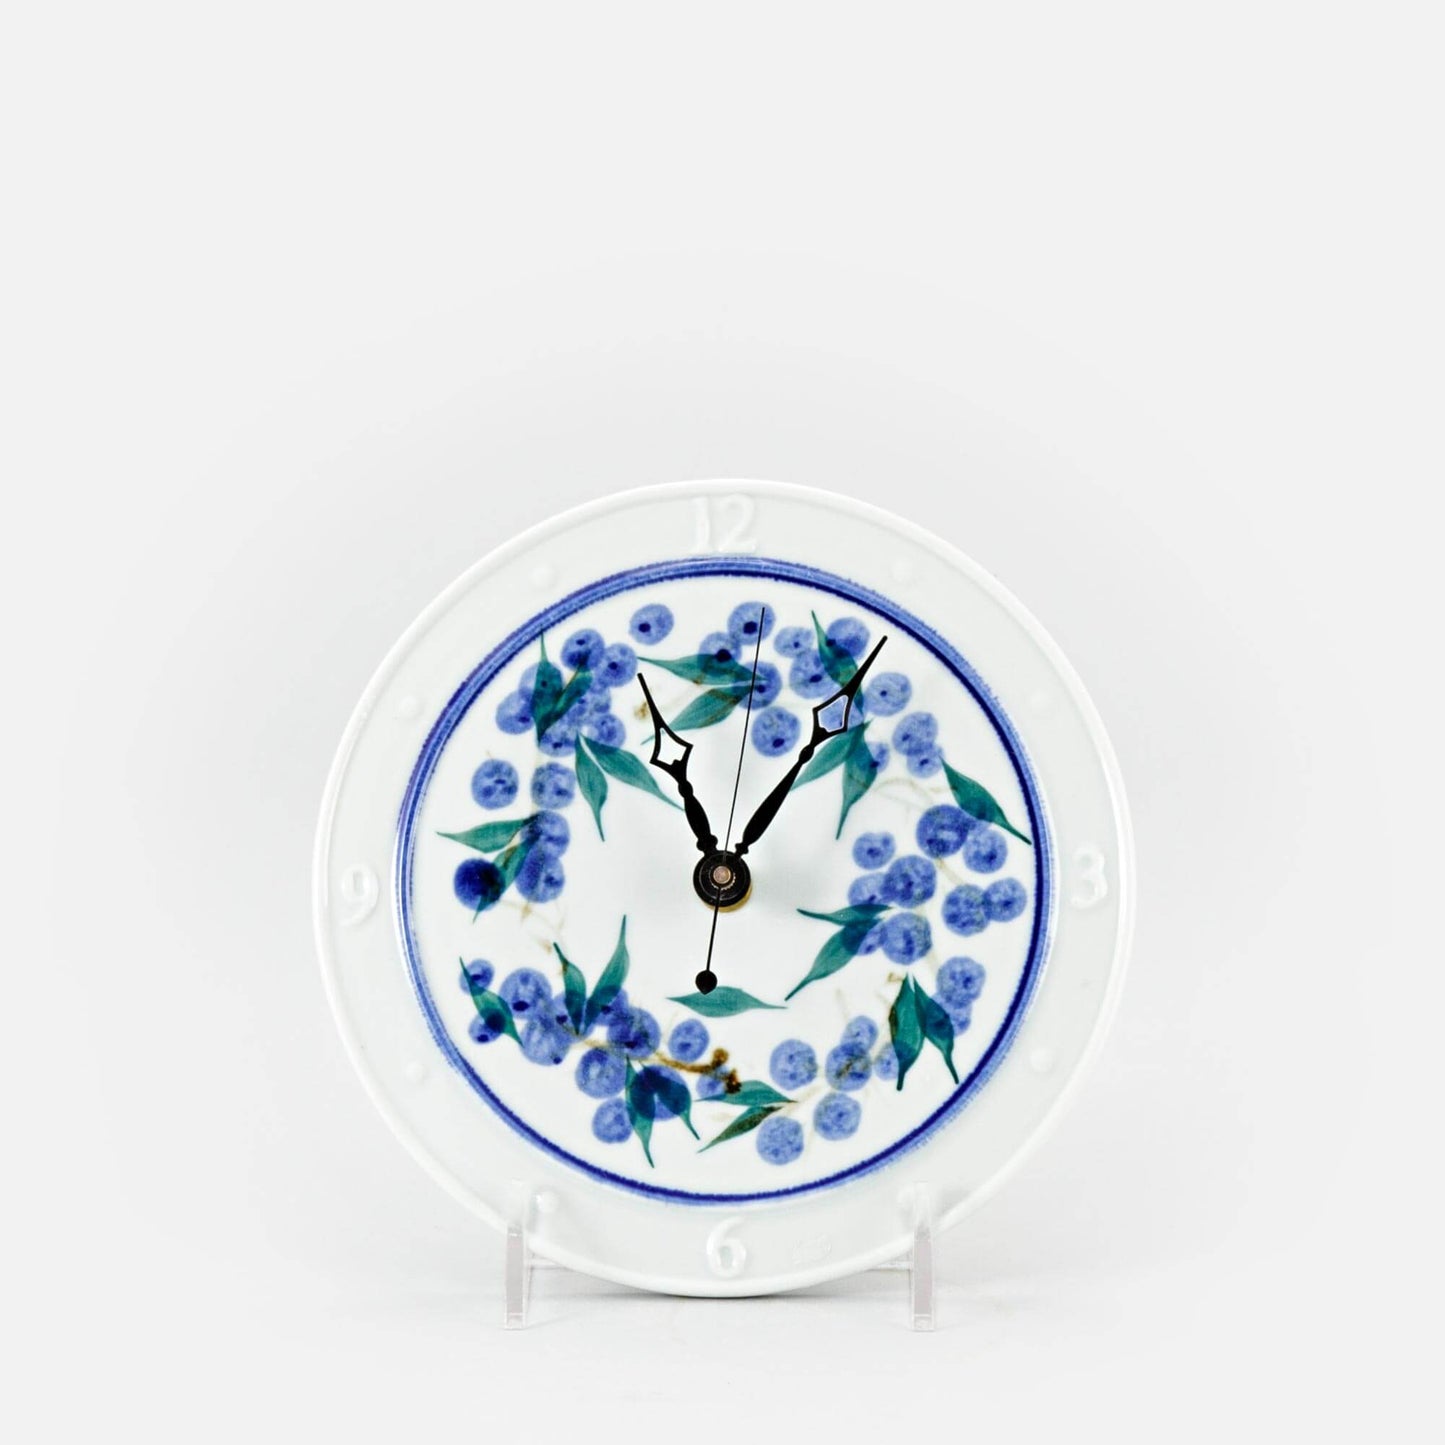 Handmade Pottery Large Clock w/ Stand in Blueberry pattern made by Georgetown Pottery in Maine